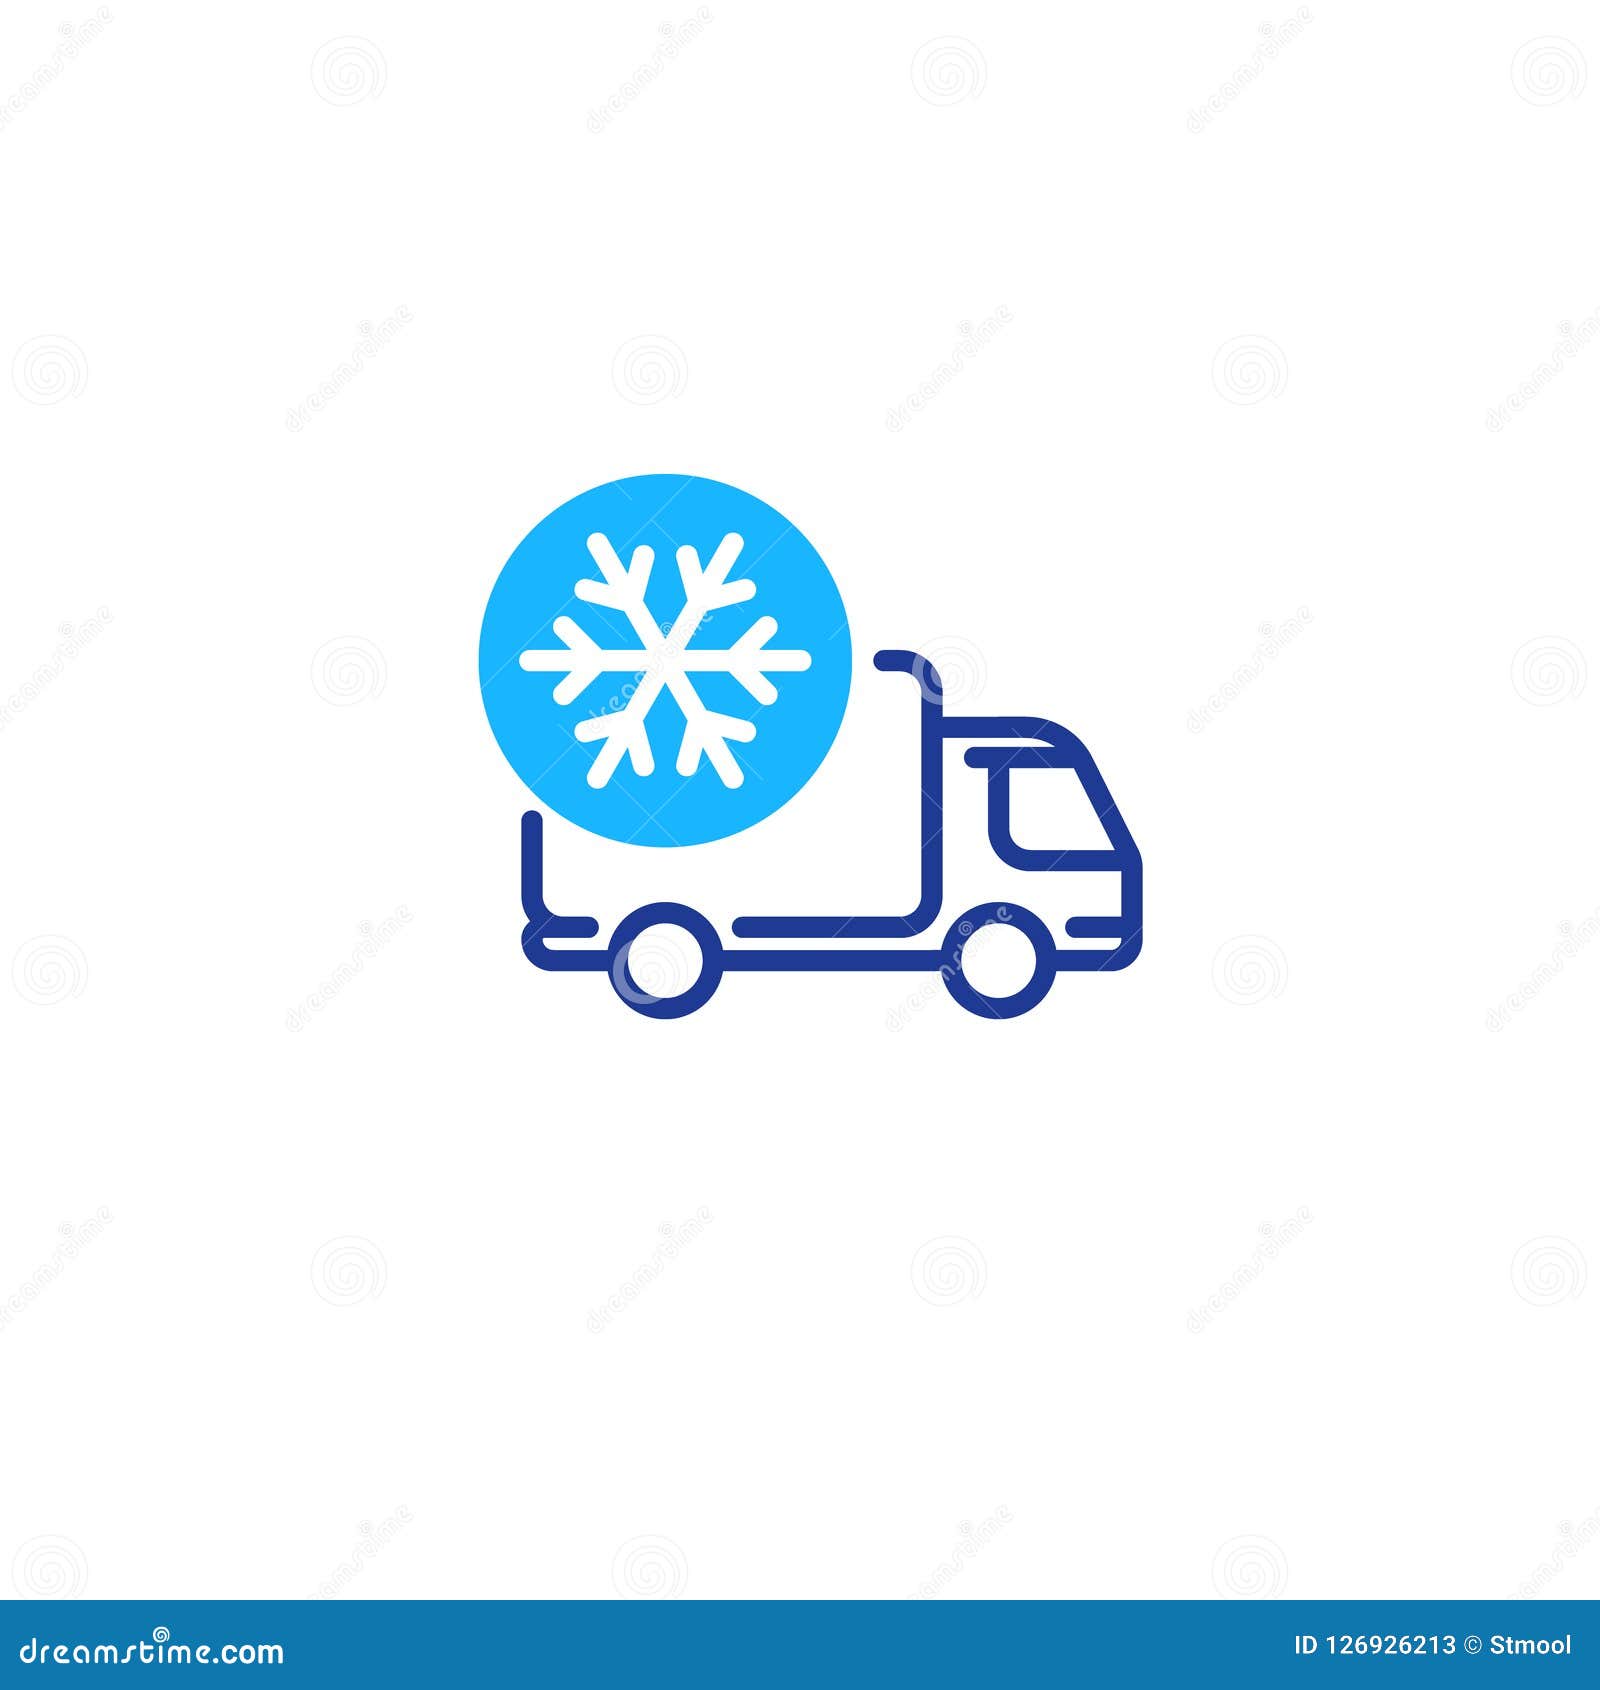 freezer truck line icon, cold product delivery transportation